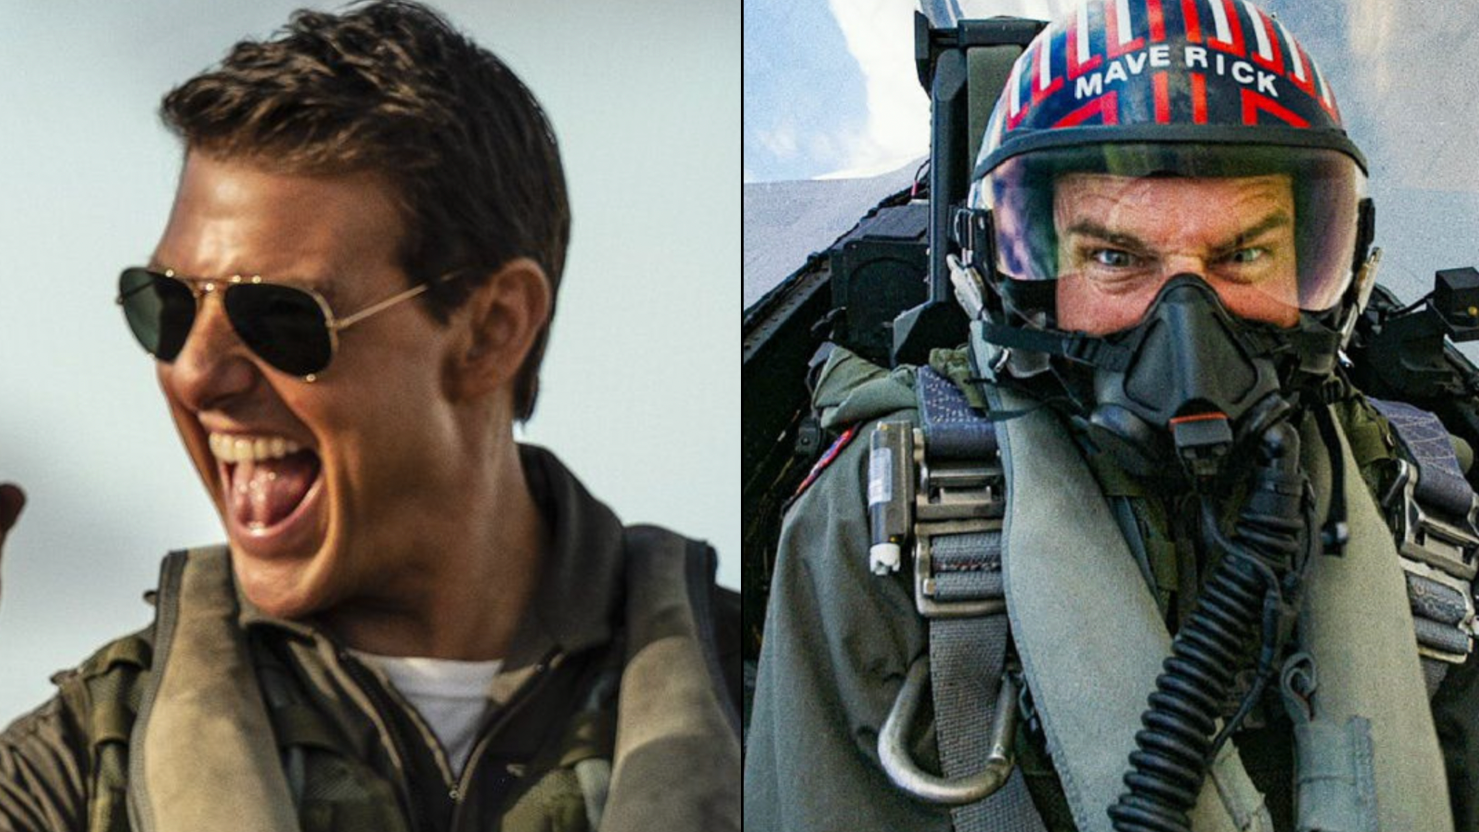 Tom Cruise 'Didn't Want to Make Another Top Gun' at First: Director